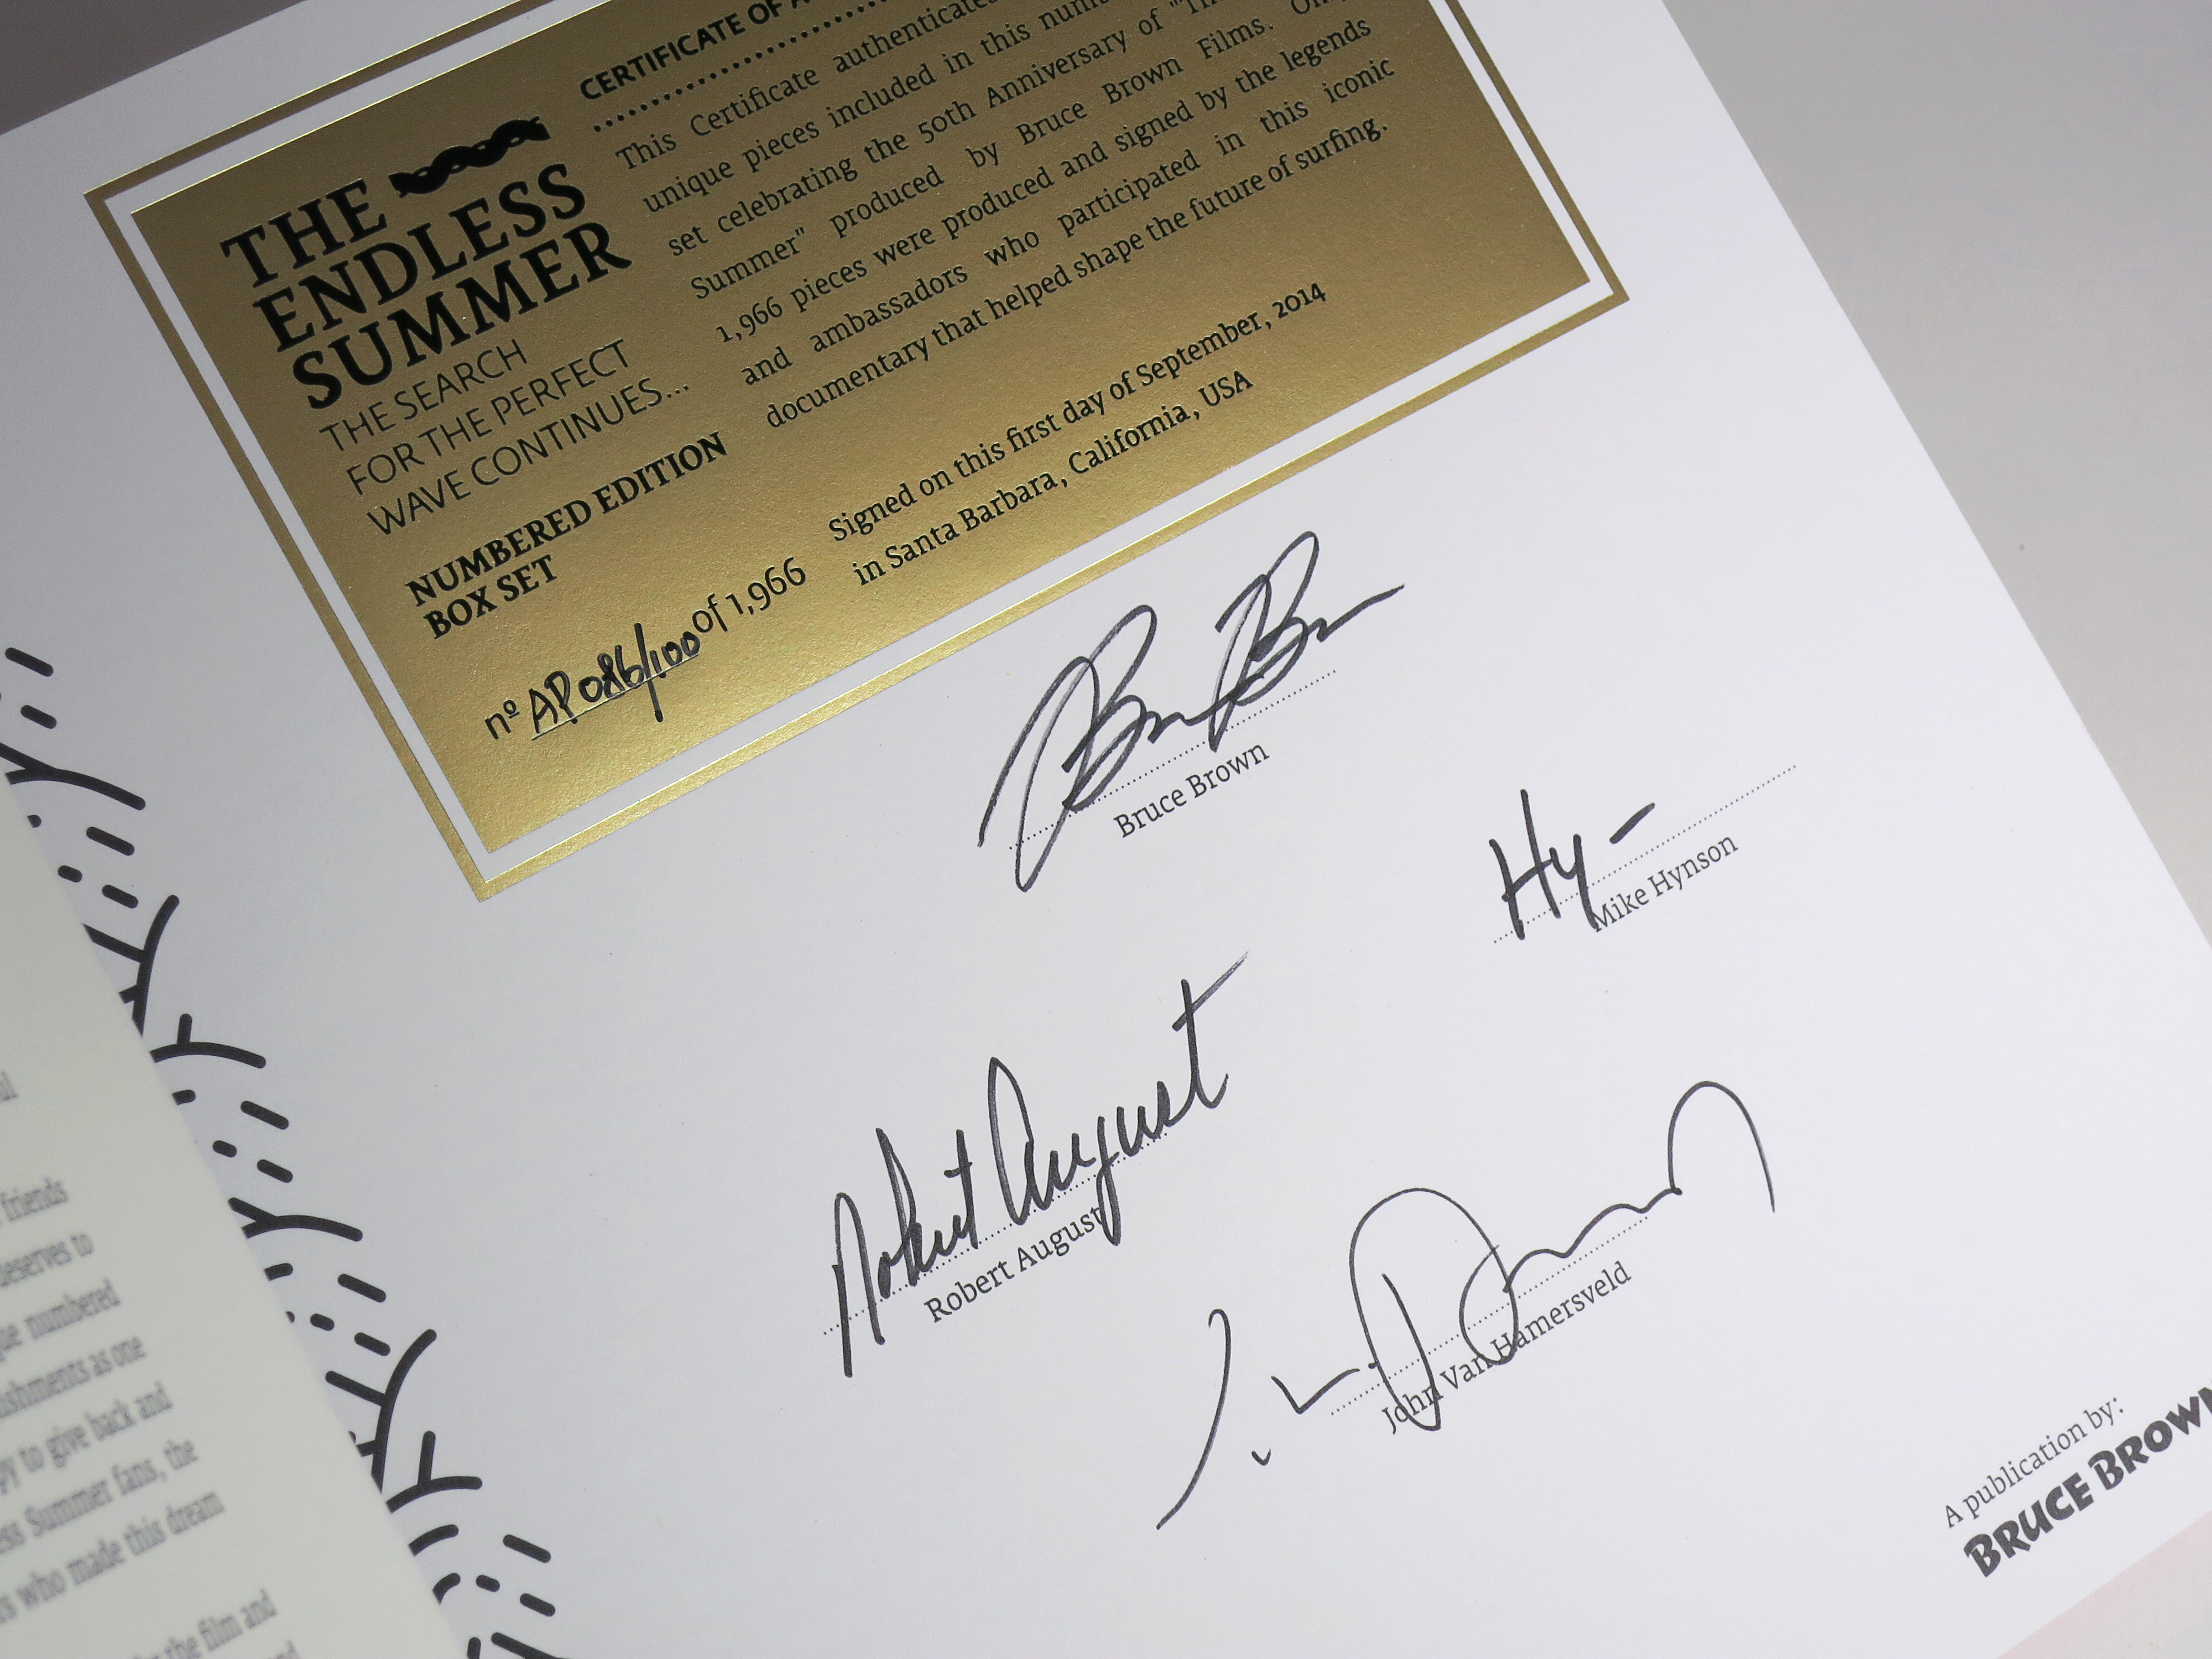 Hand-Signed Certificate of Authenticity signed by Bruce Brown, Legendary Surfers Robert August and Mike Hynson and Poster Designer, John Van Hamersveld.